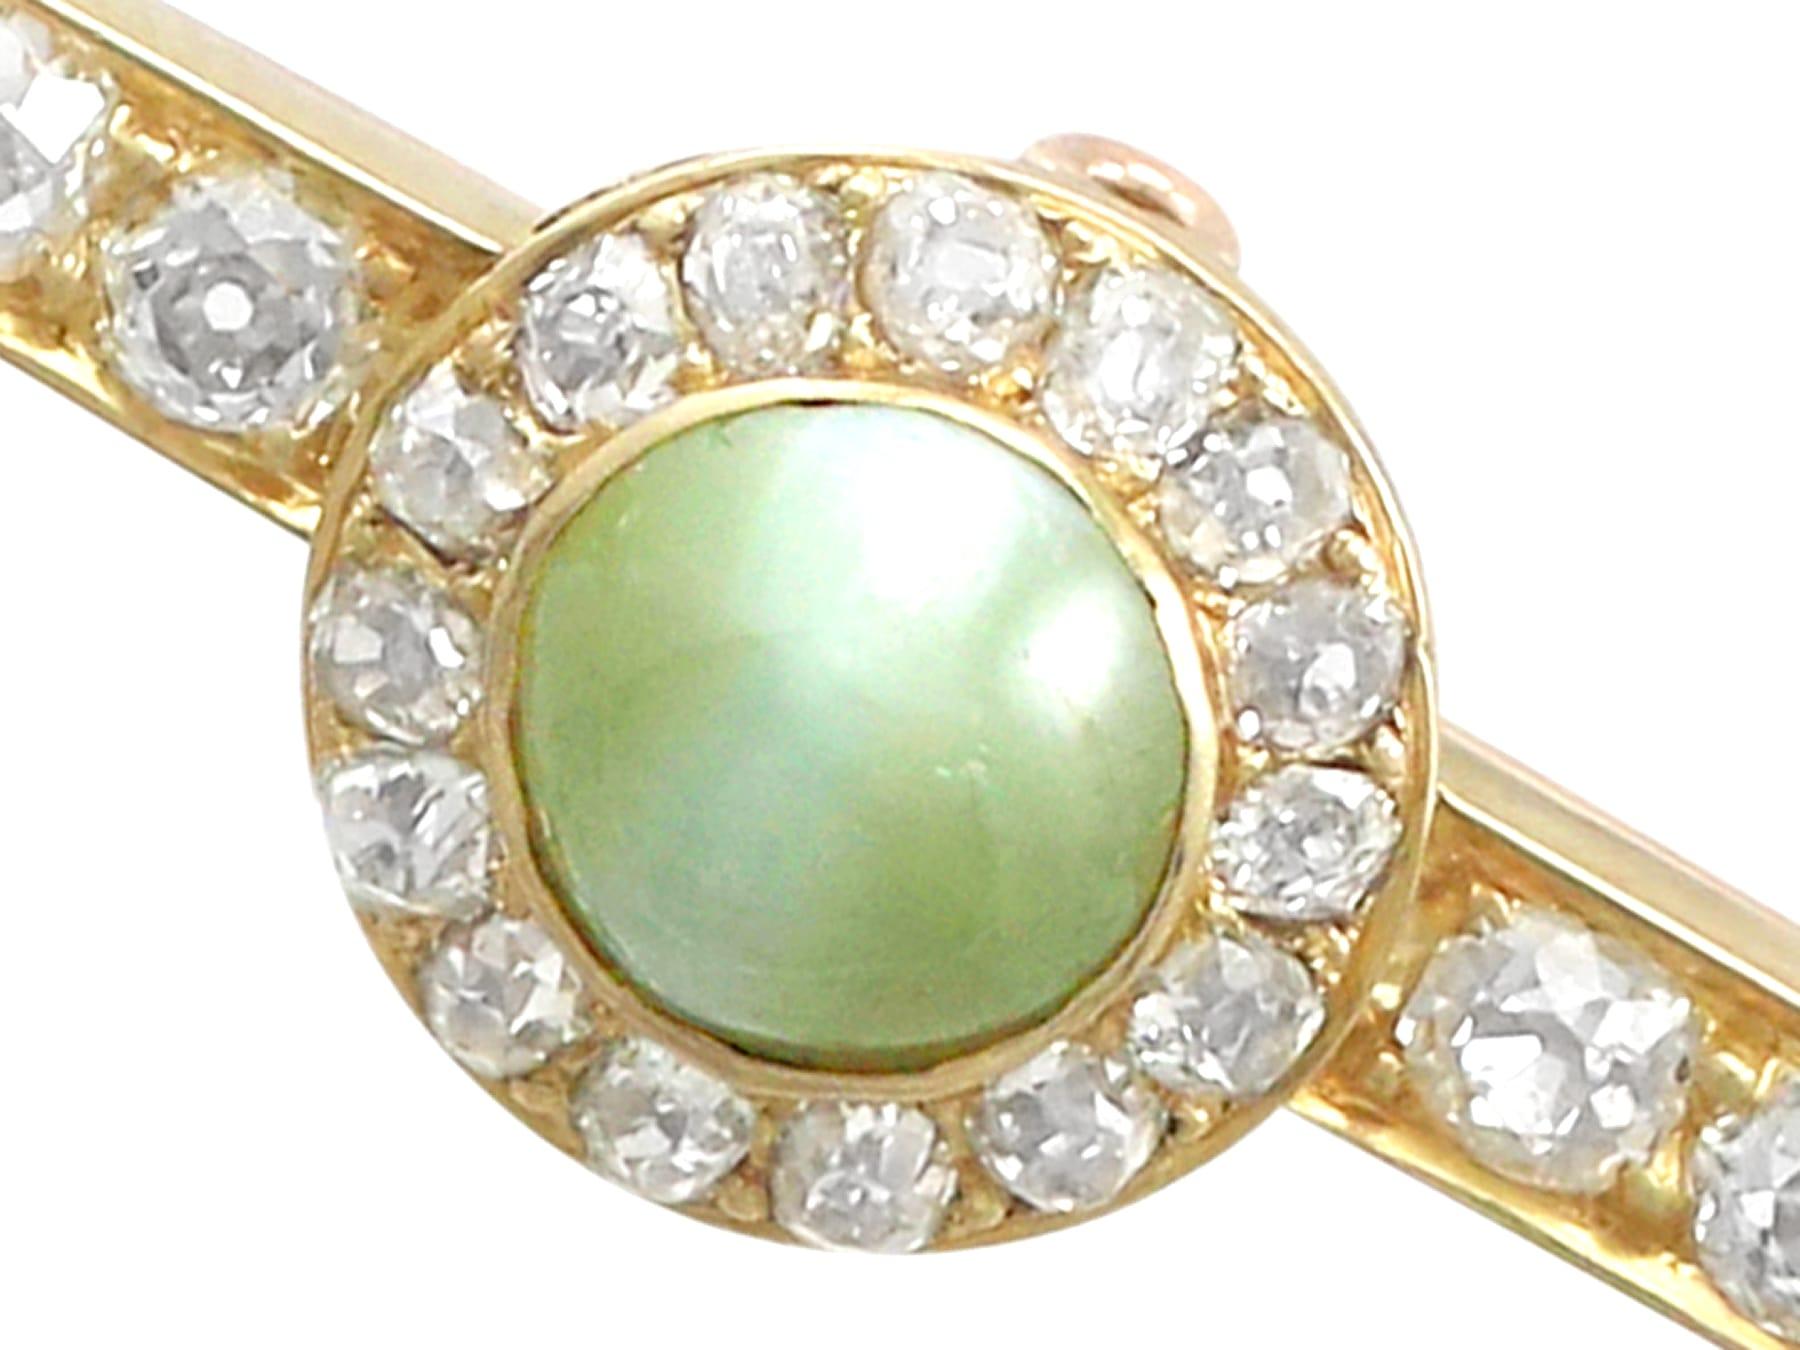 A stunning antique Victorian 1.55 Ct cat's eye chrysoberyl and 1.10 Ct diamond, pearl and 18k yellow gold bar brooch; part of our diverse antique jewelry collections.

This stunning, fine and impressive antique Victorian cabochon cut Chrysoberyl